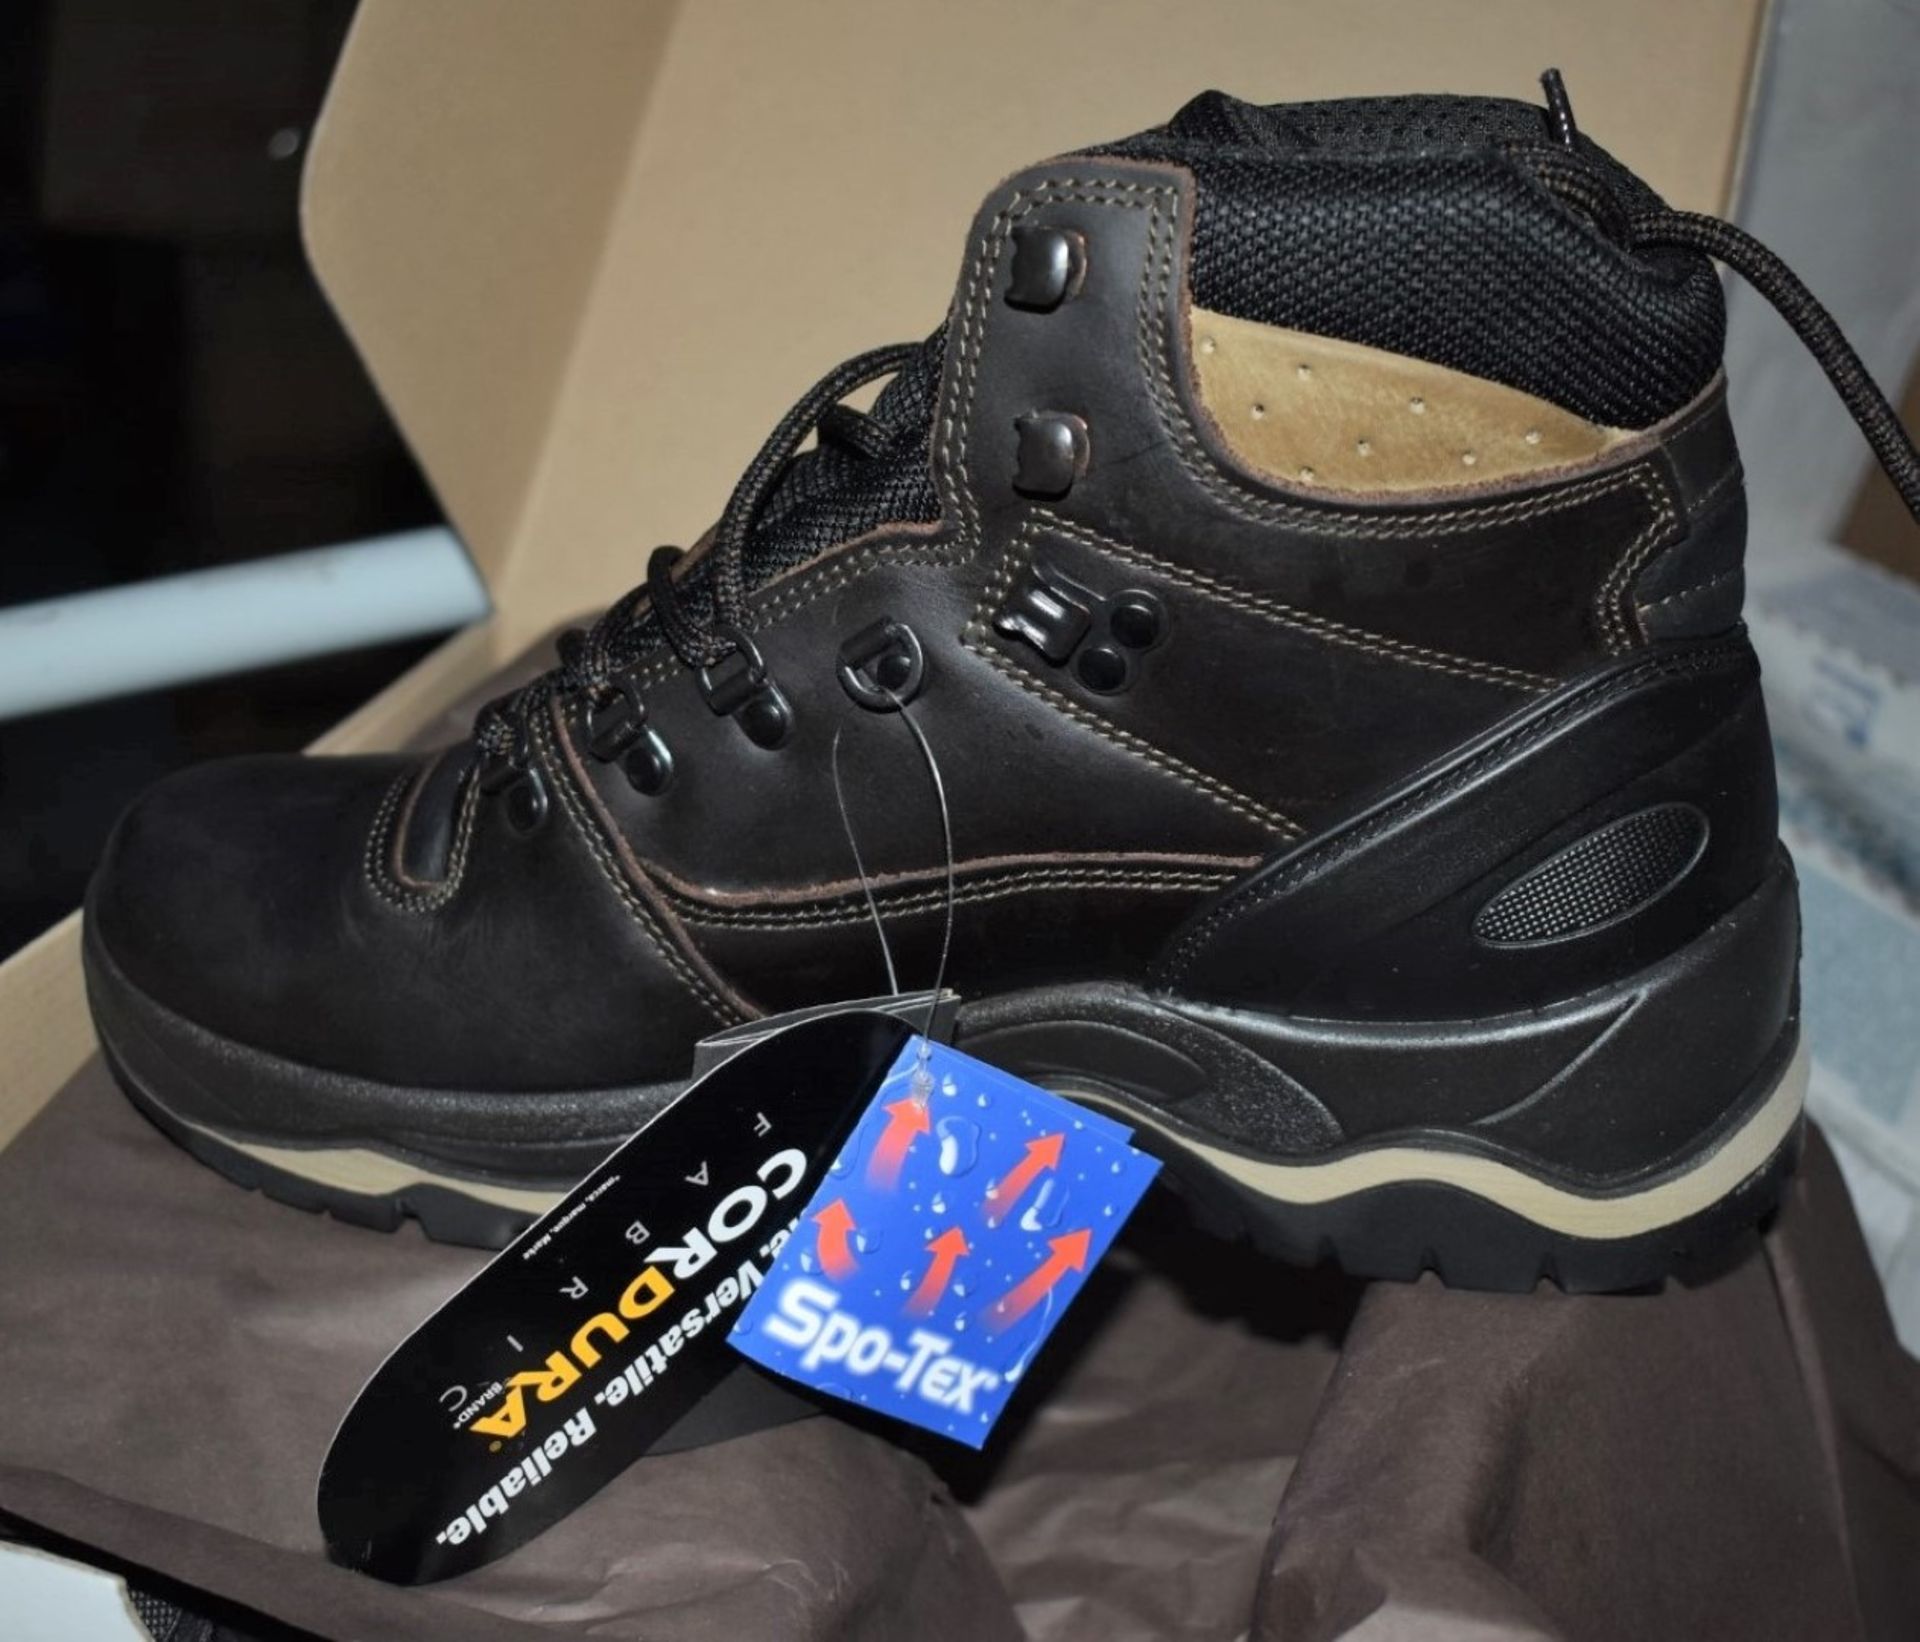 1 x Pair of Mens VIBRAM Walking Boots - Outdoor Pro Spo-Tex Trekking Boots With Support System - - Image 3 of 3